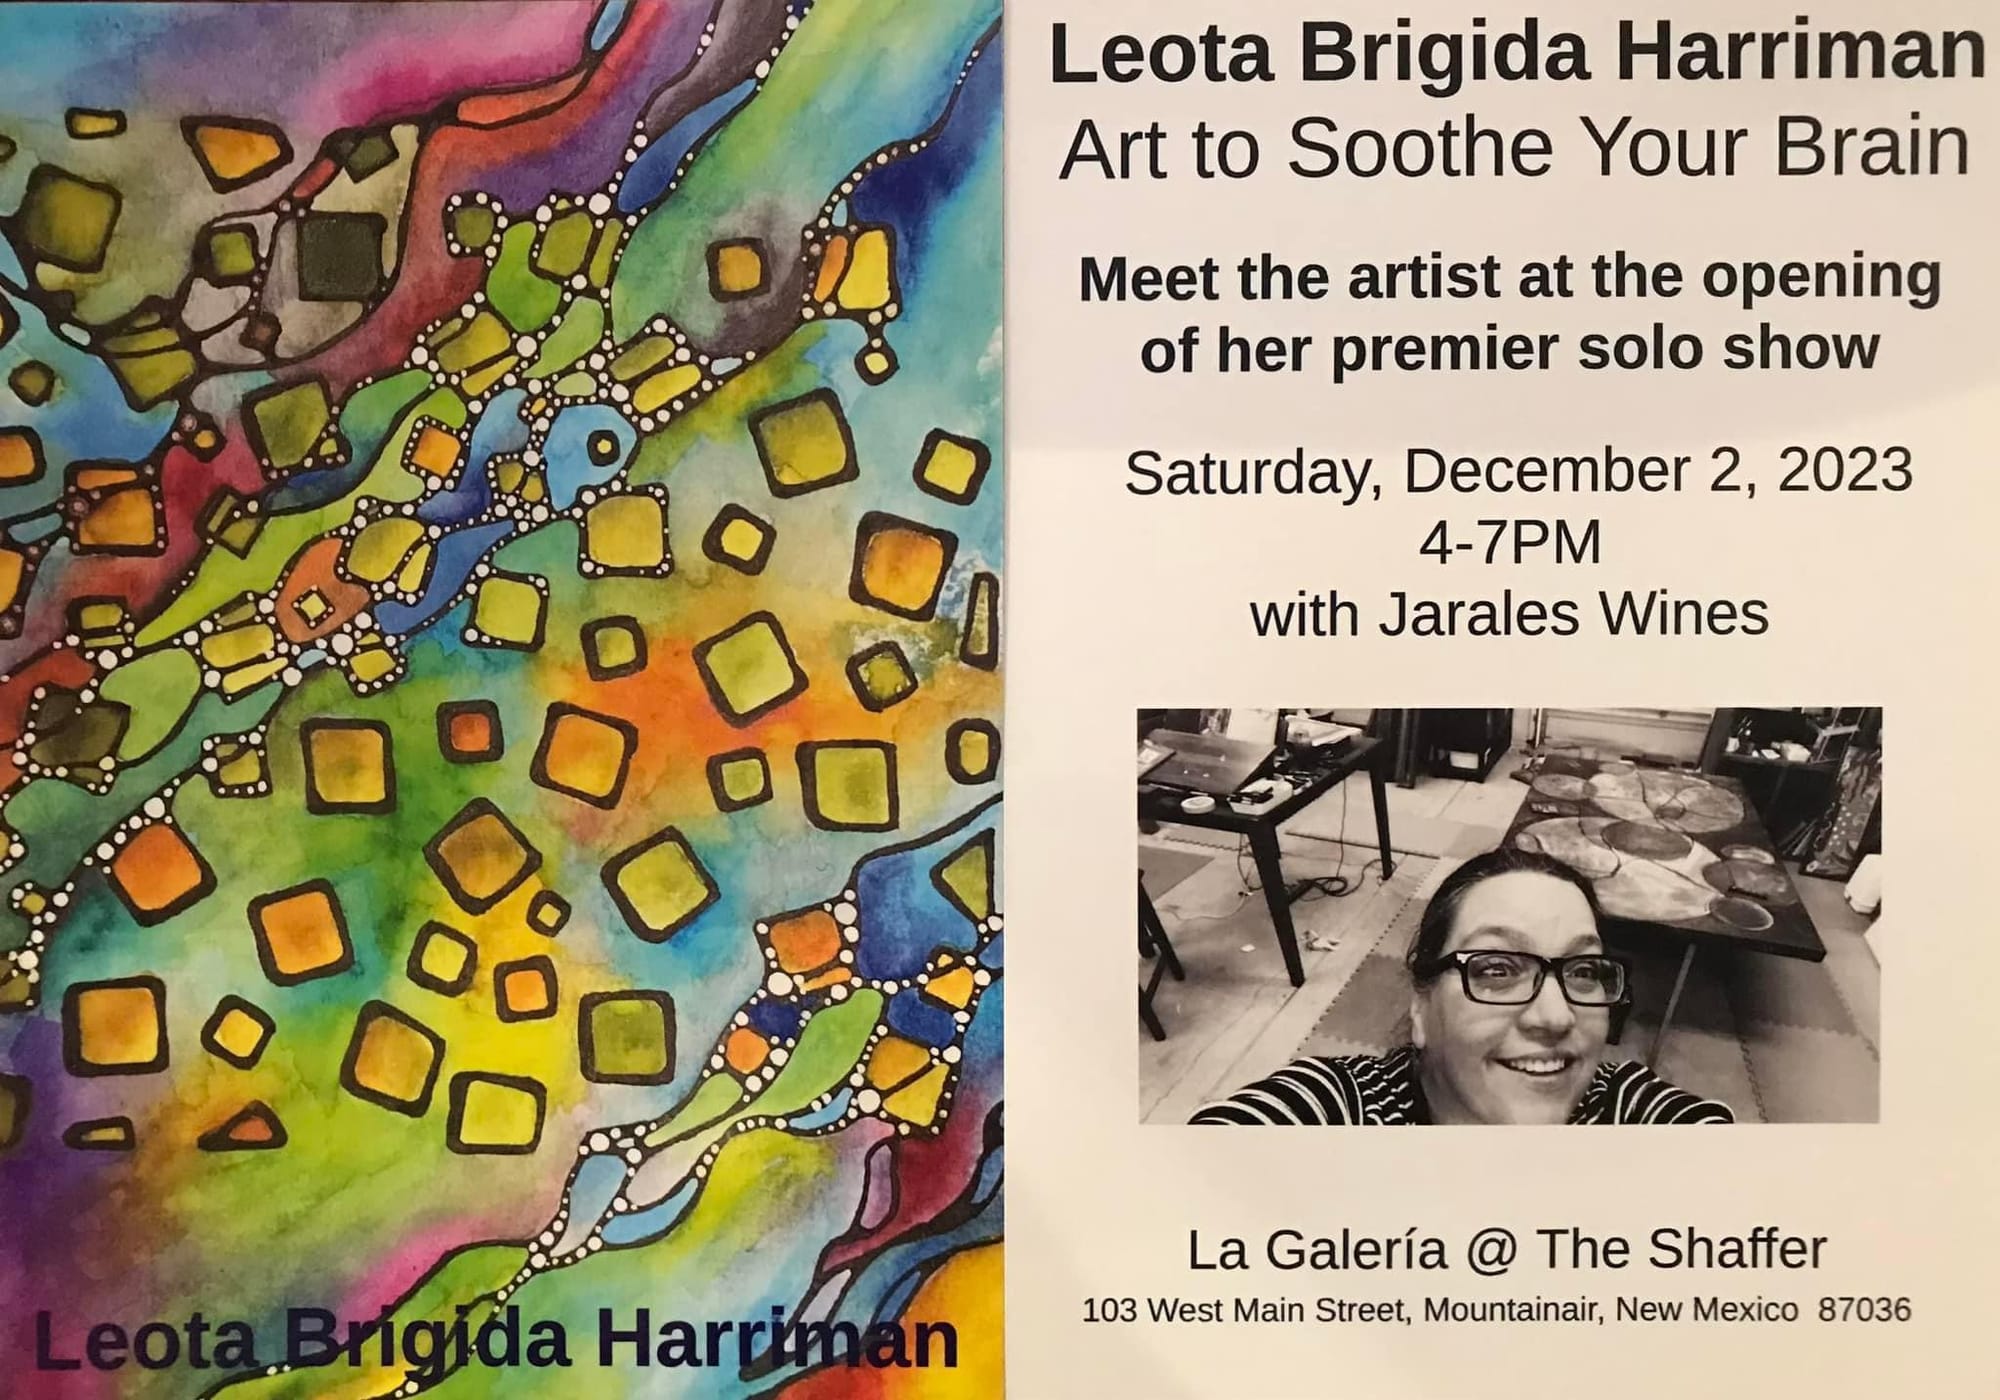 Art to Soothe Your Brain, Saturday, December 2, 2023, from 4:00 PM to 7:00 PM